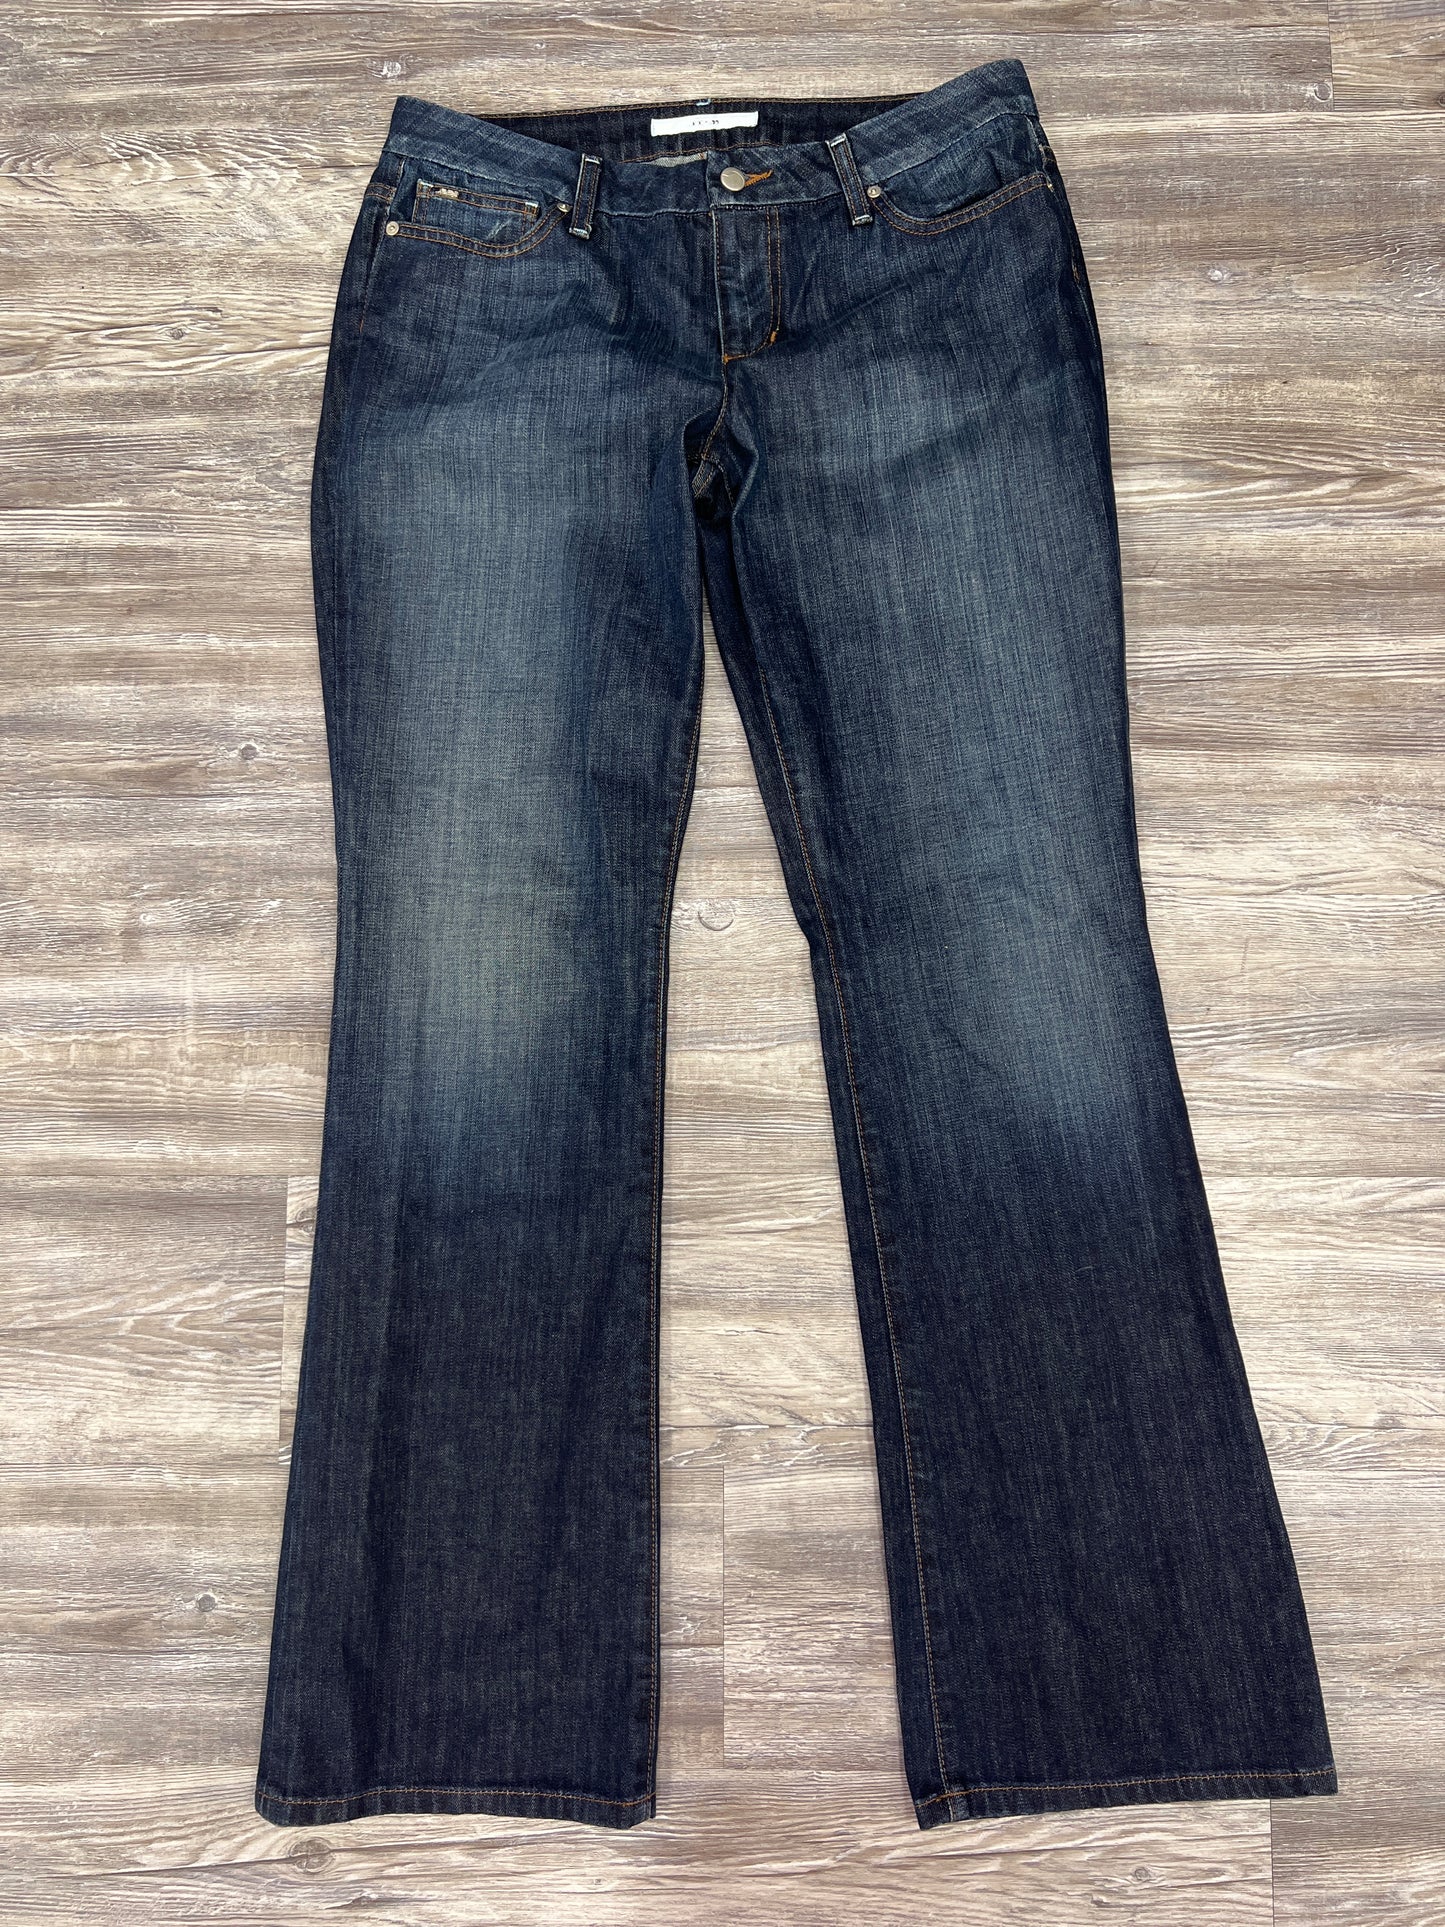 Jeans Designer By Joes Jeans Size: 14